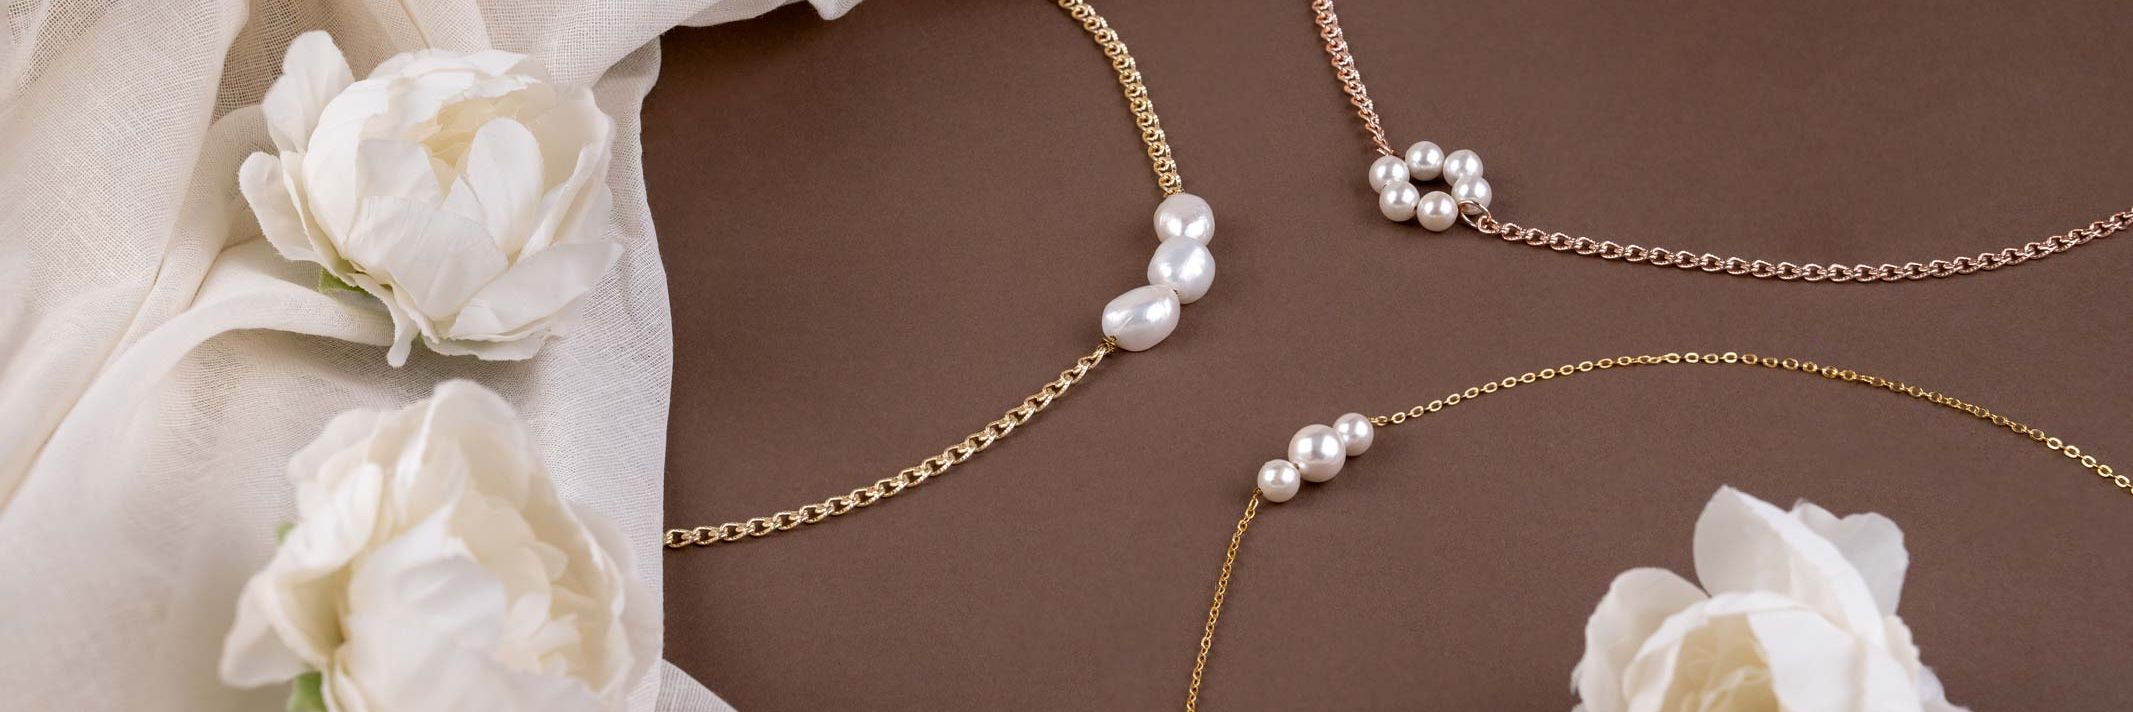 Buy Modern Pearl Necklace 14kt Gold Filled OR Sterling Silver Freshwater  Pearls Online in India - Etsy